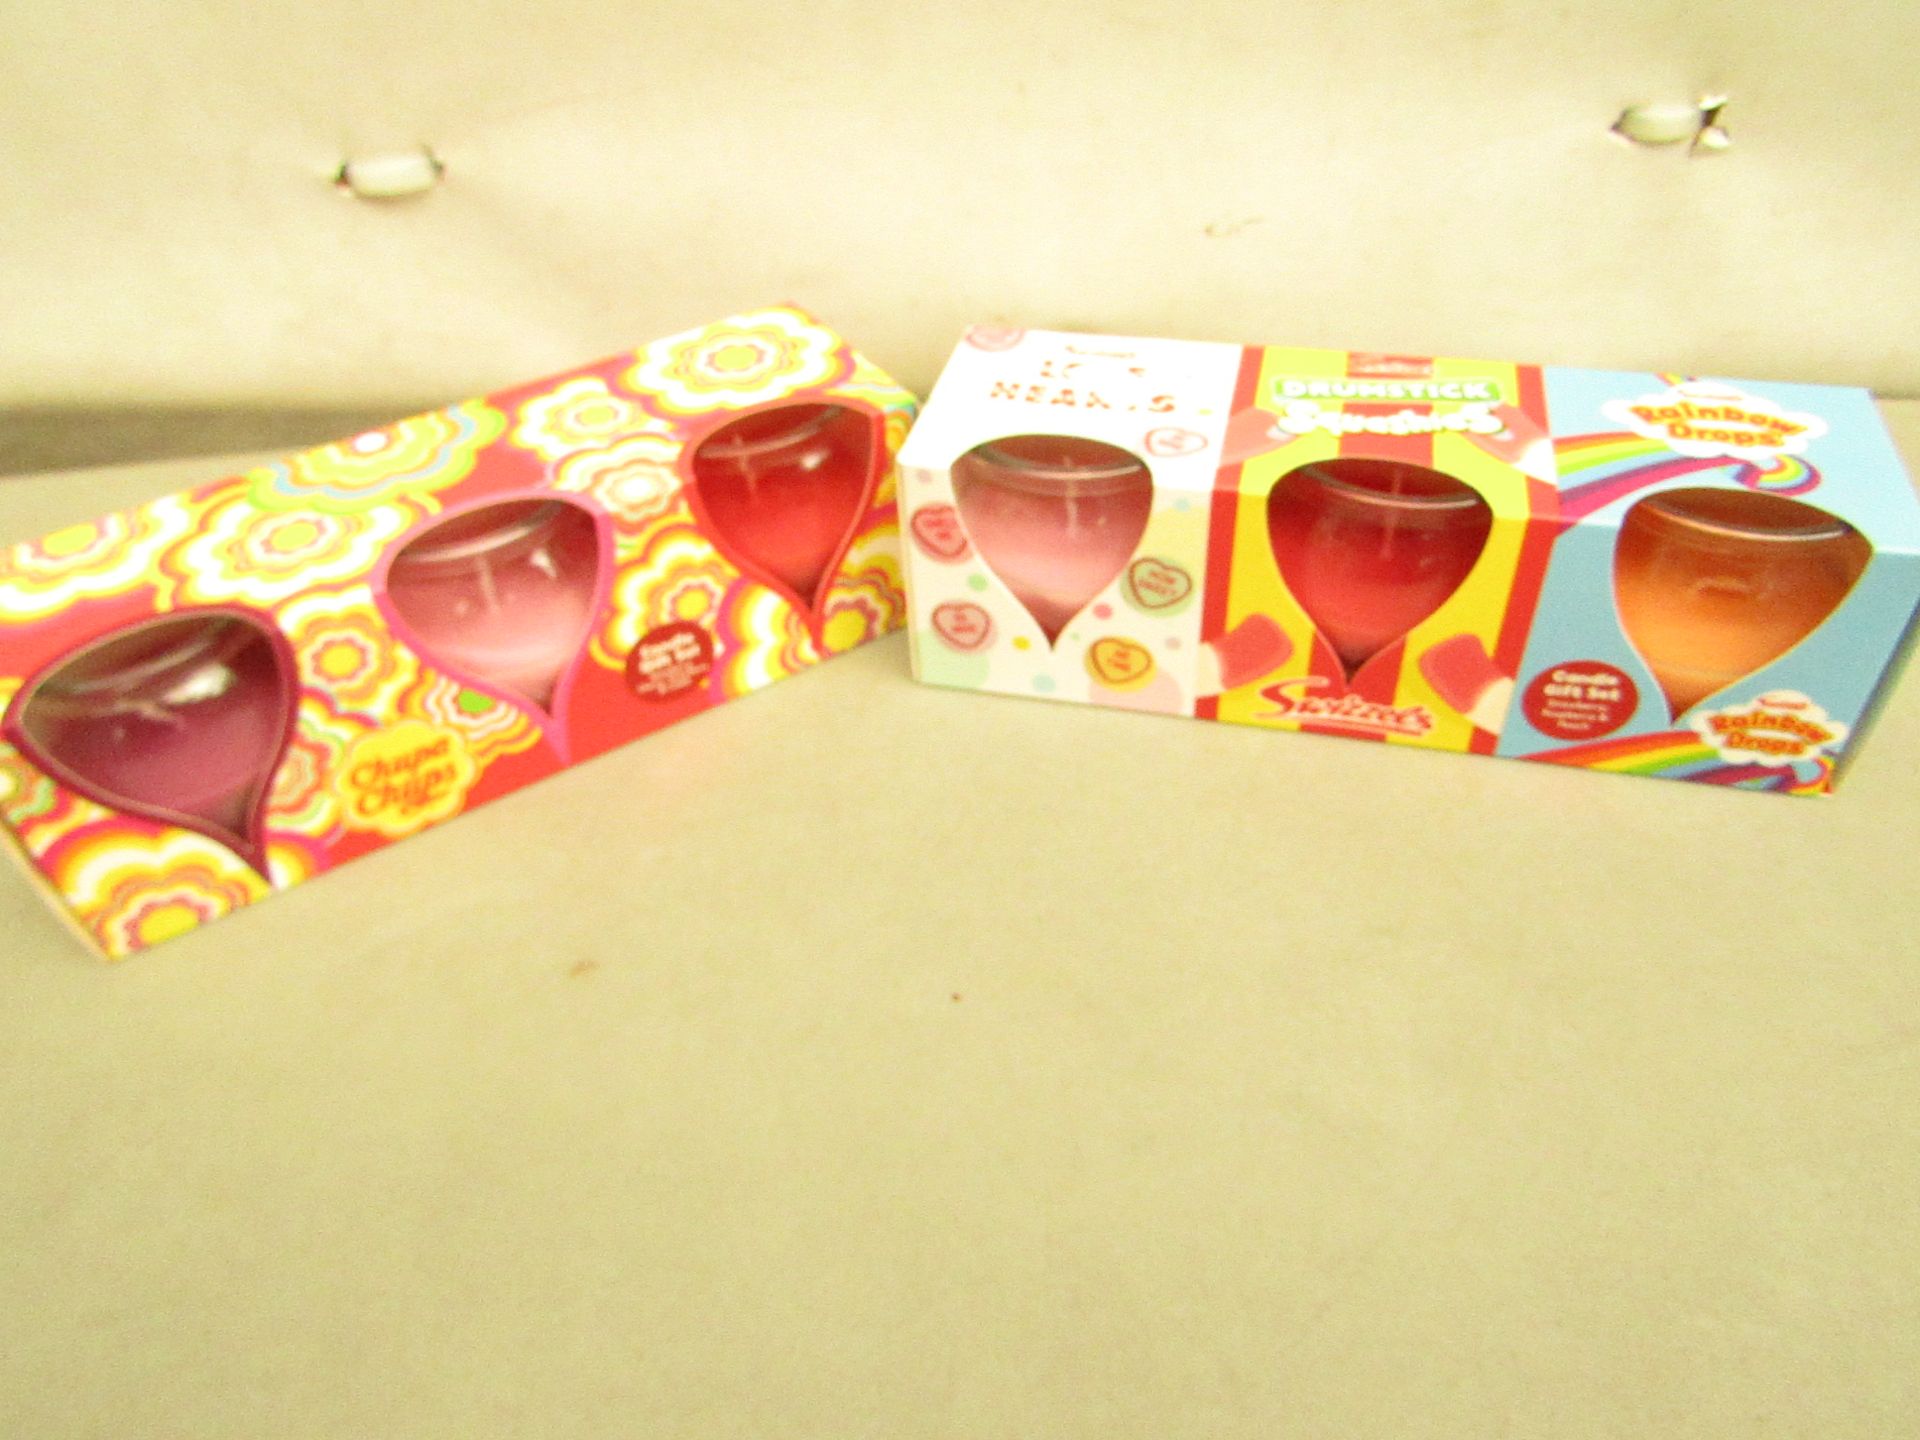 2 Packs of 3 Candle Sets.Chupa Chups & Swizzels. New & packaged